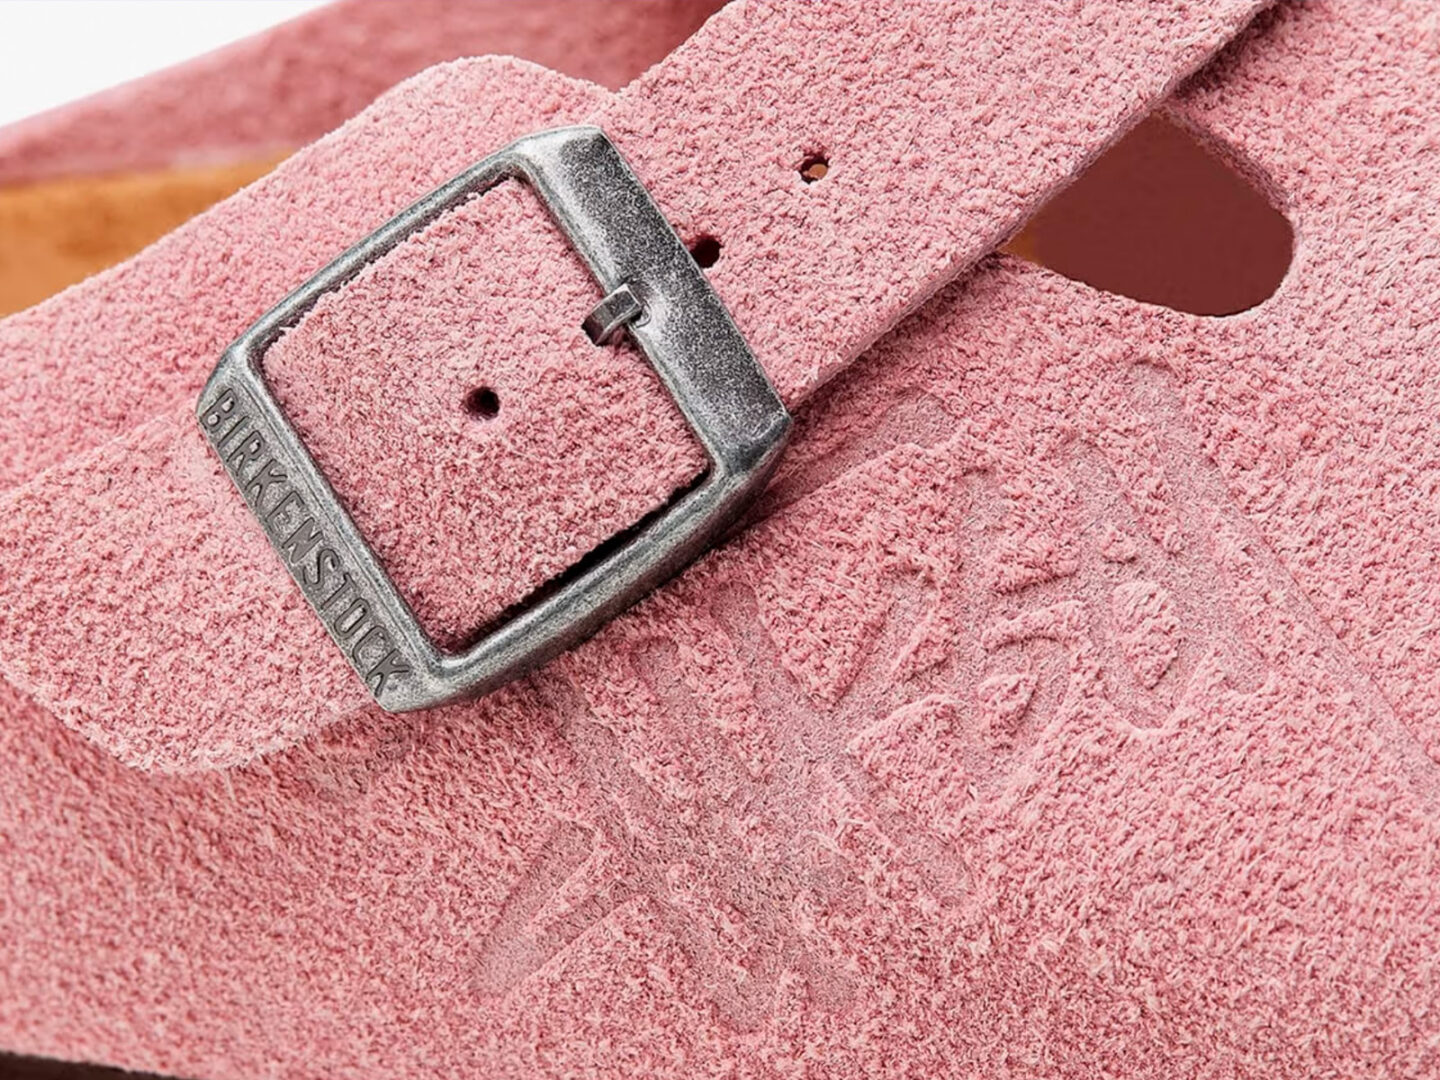 Release date of the expected Stüssy x Birkenstock collaboration is now confirmed